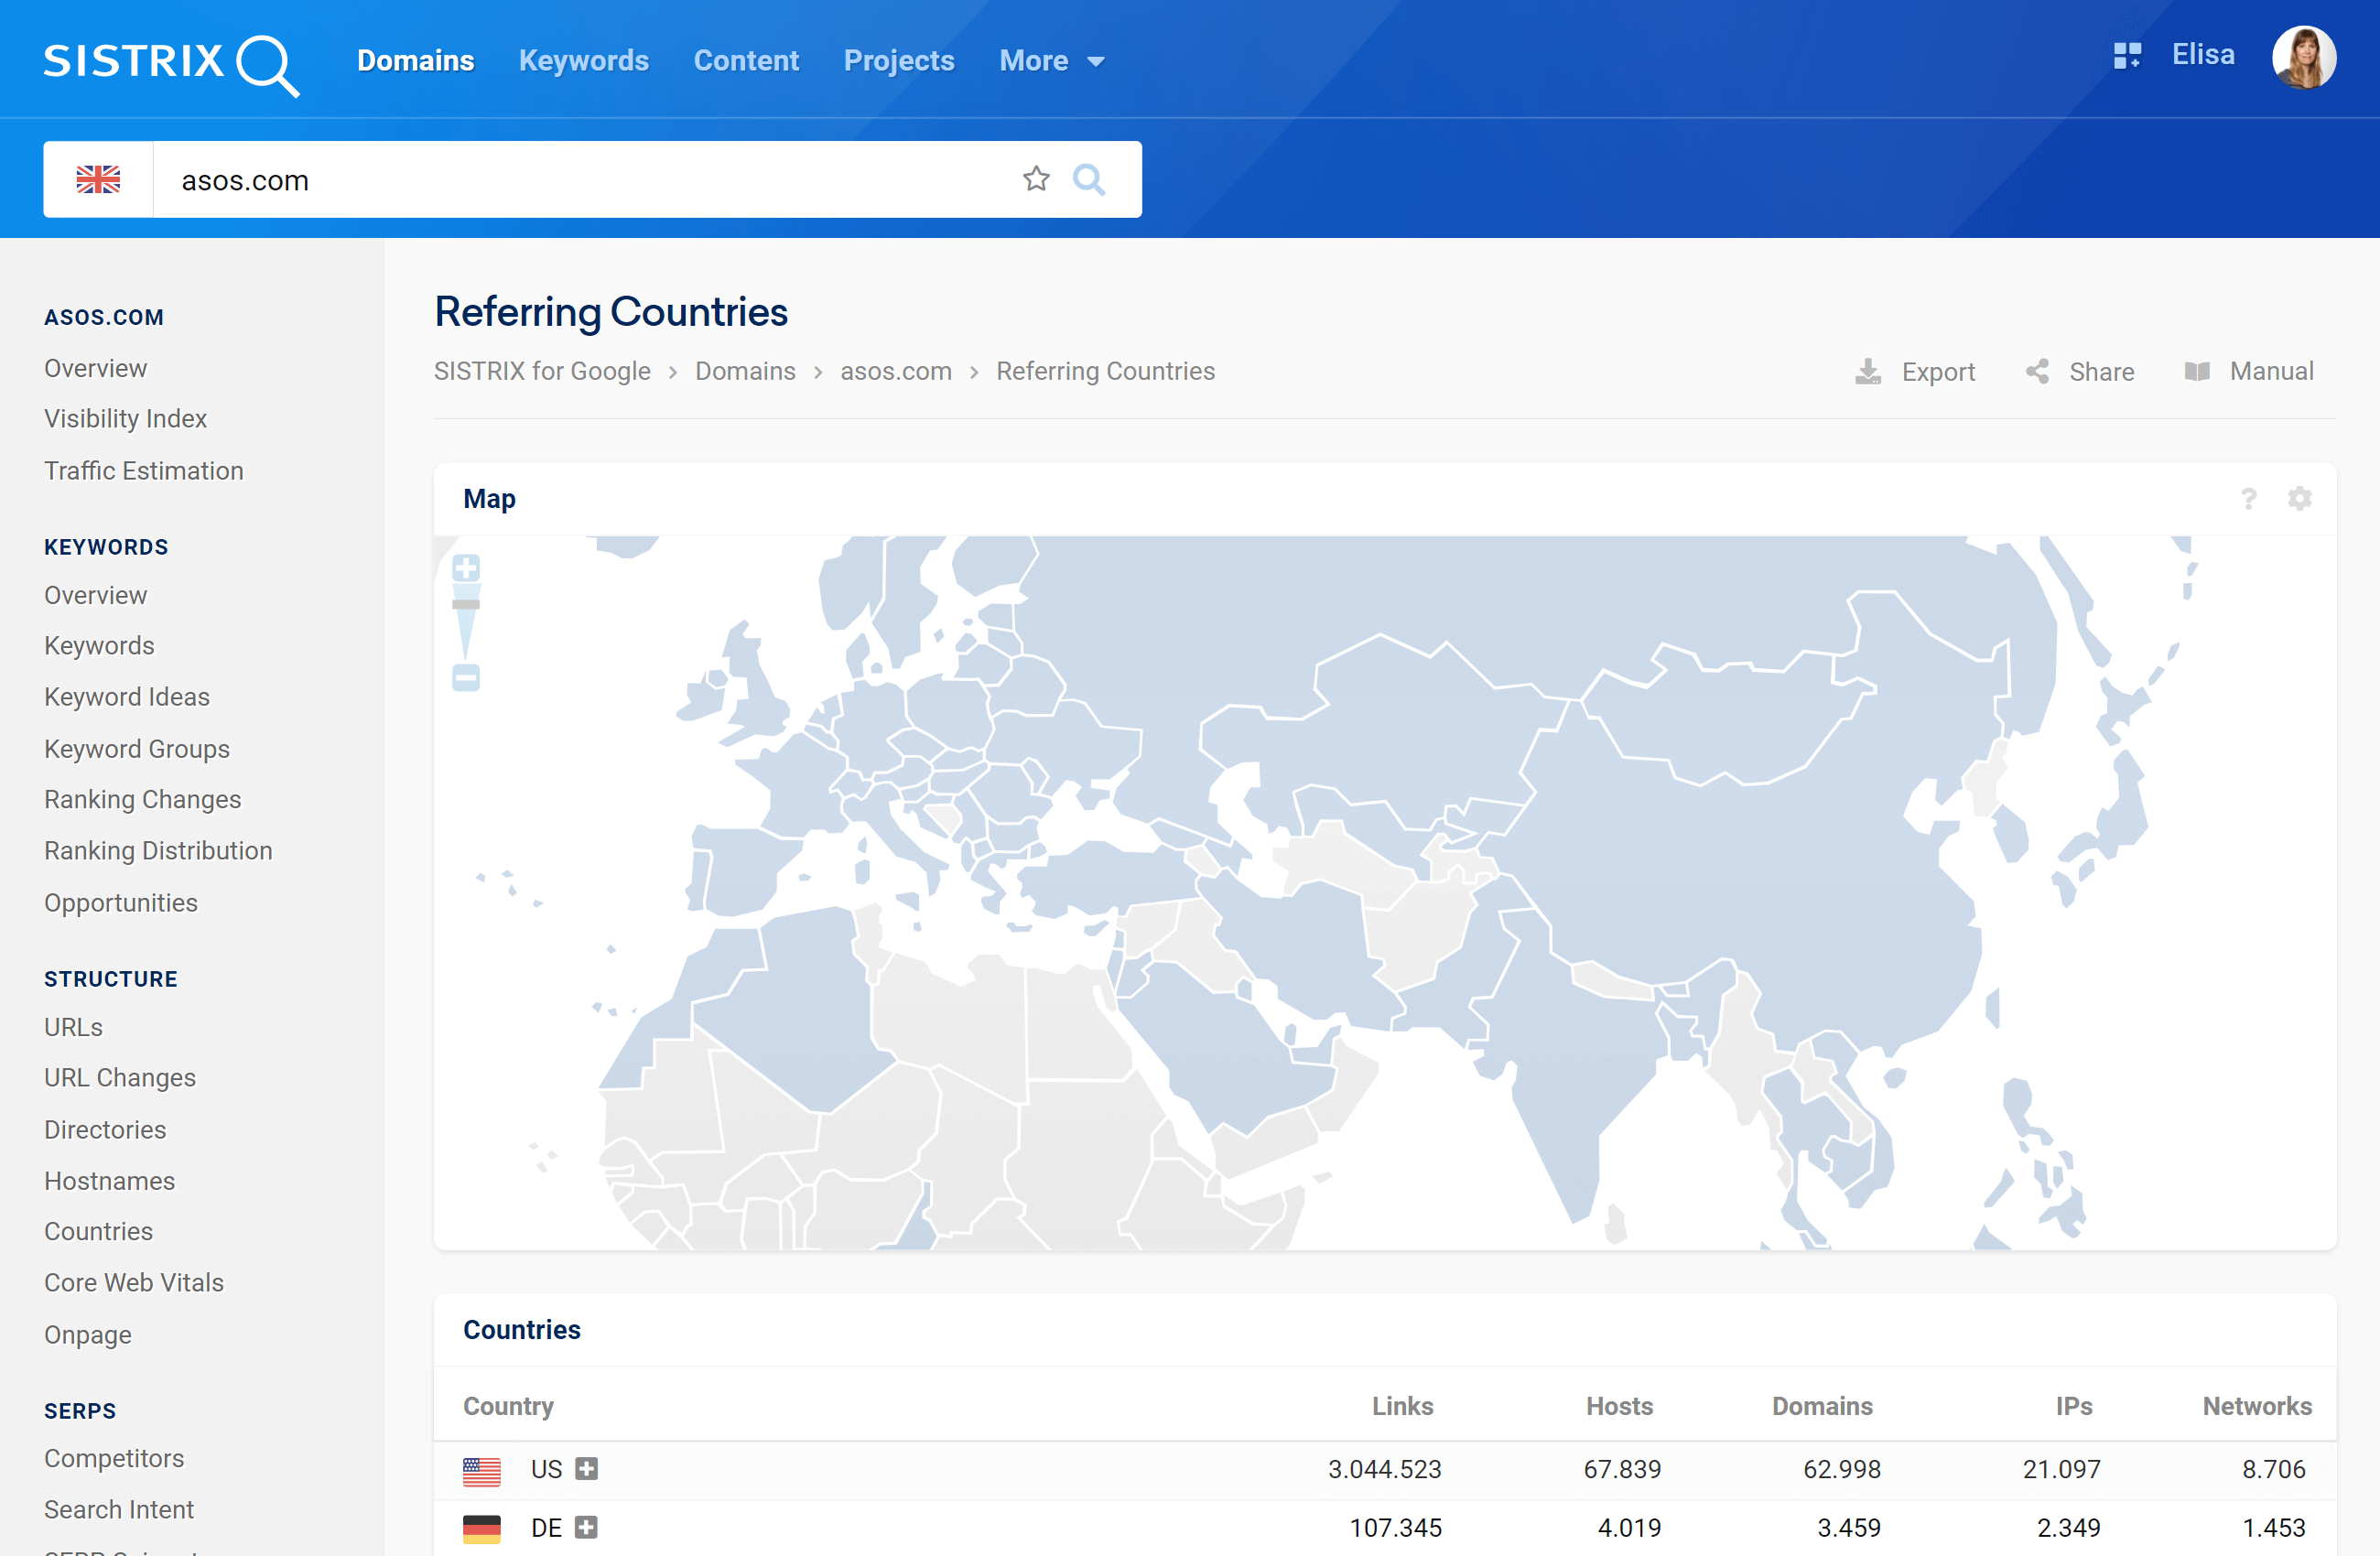 Referring Countries for asos.com in SISTRIX